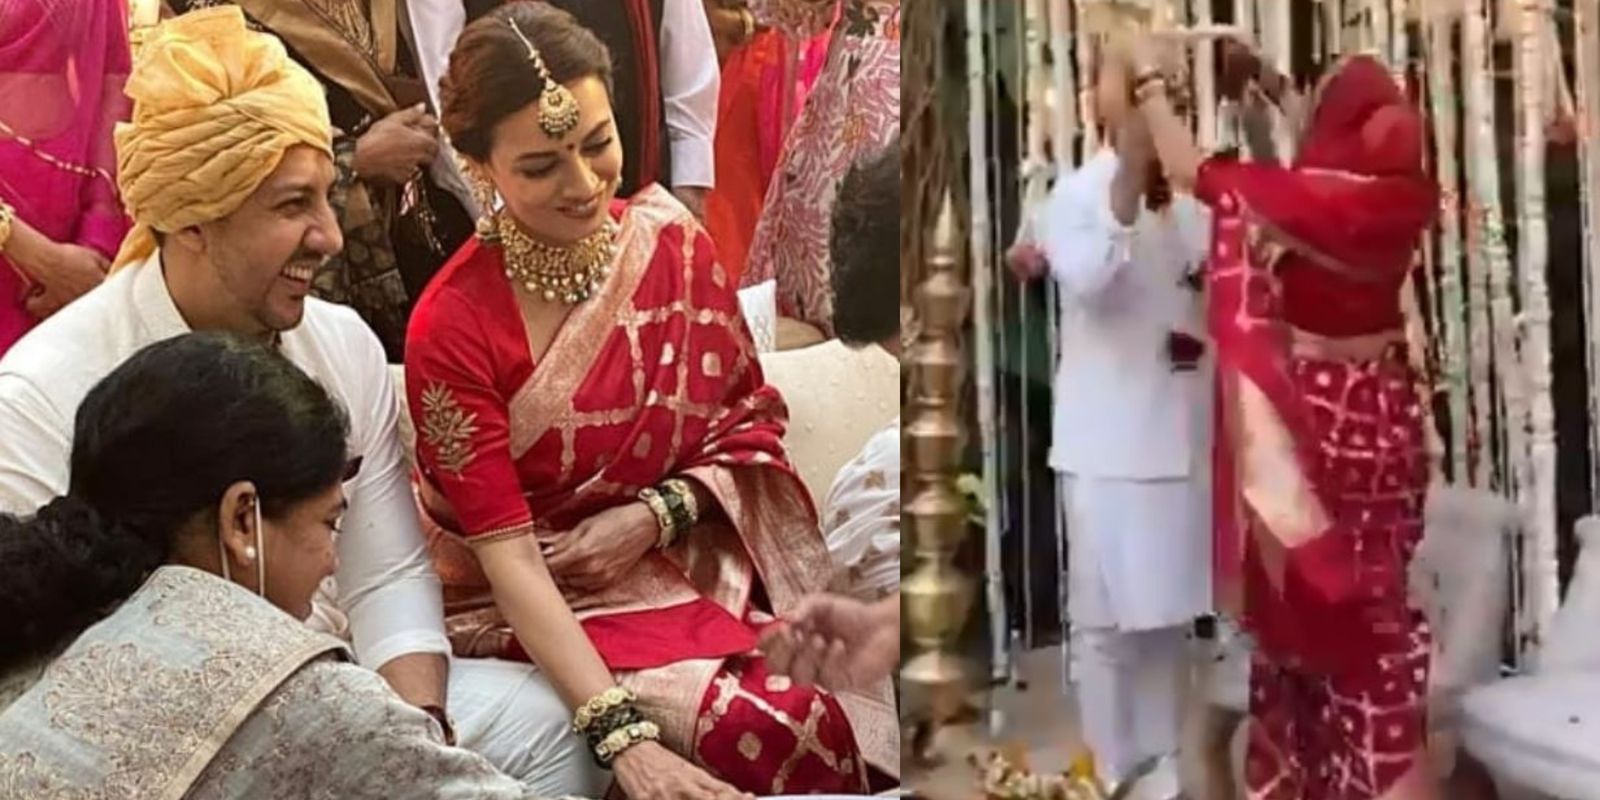 Dia Mirza- Vaibhav Rekhi Wedding: More Pictures And Videos From The Ceremony Out, Check These Here...